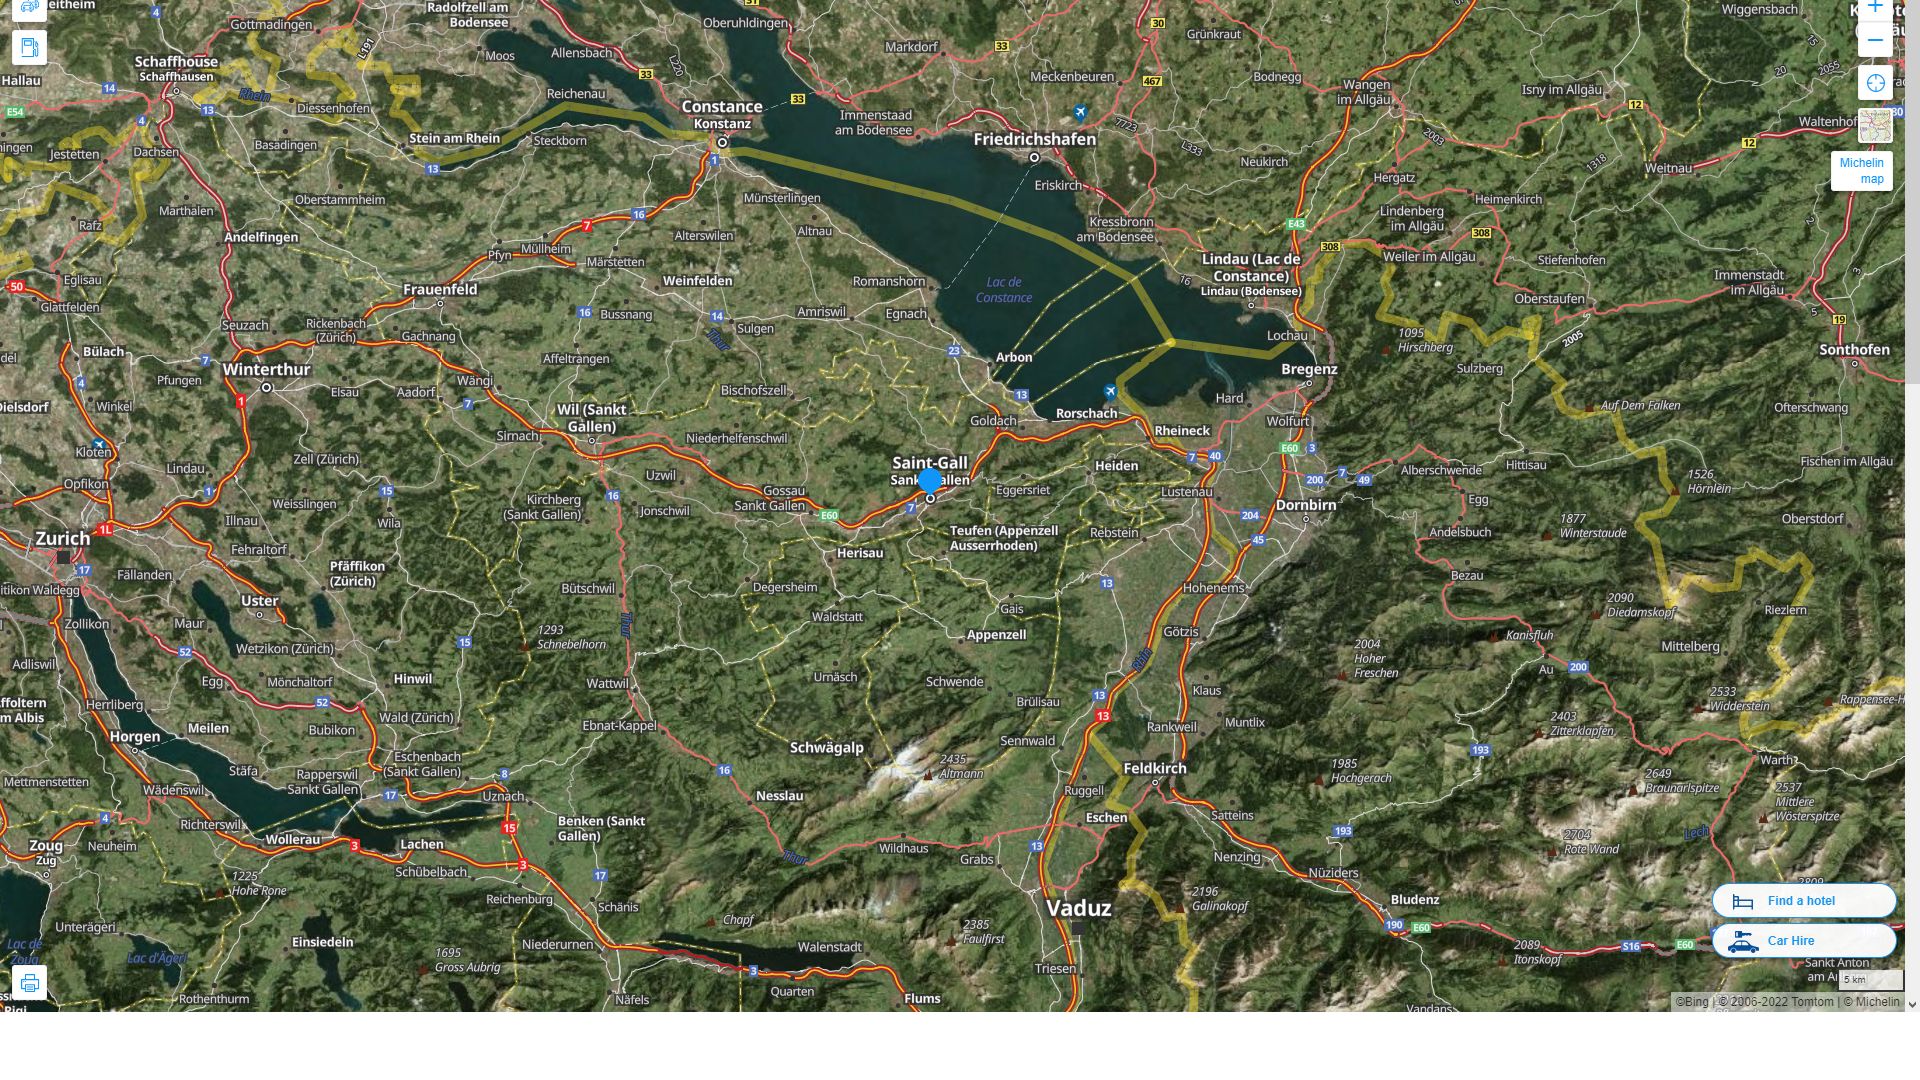 St. Gallen Highway and Road Map with Satellite View